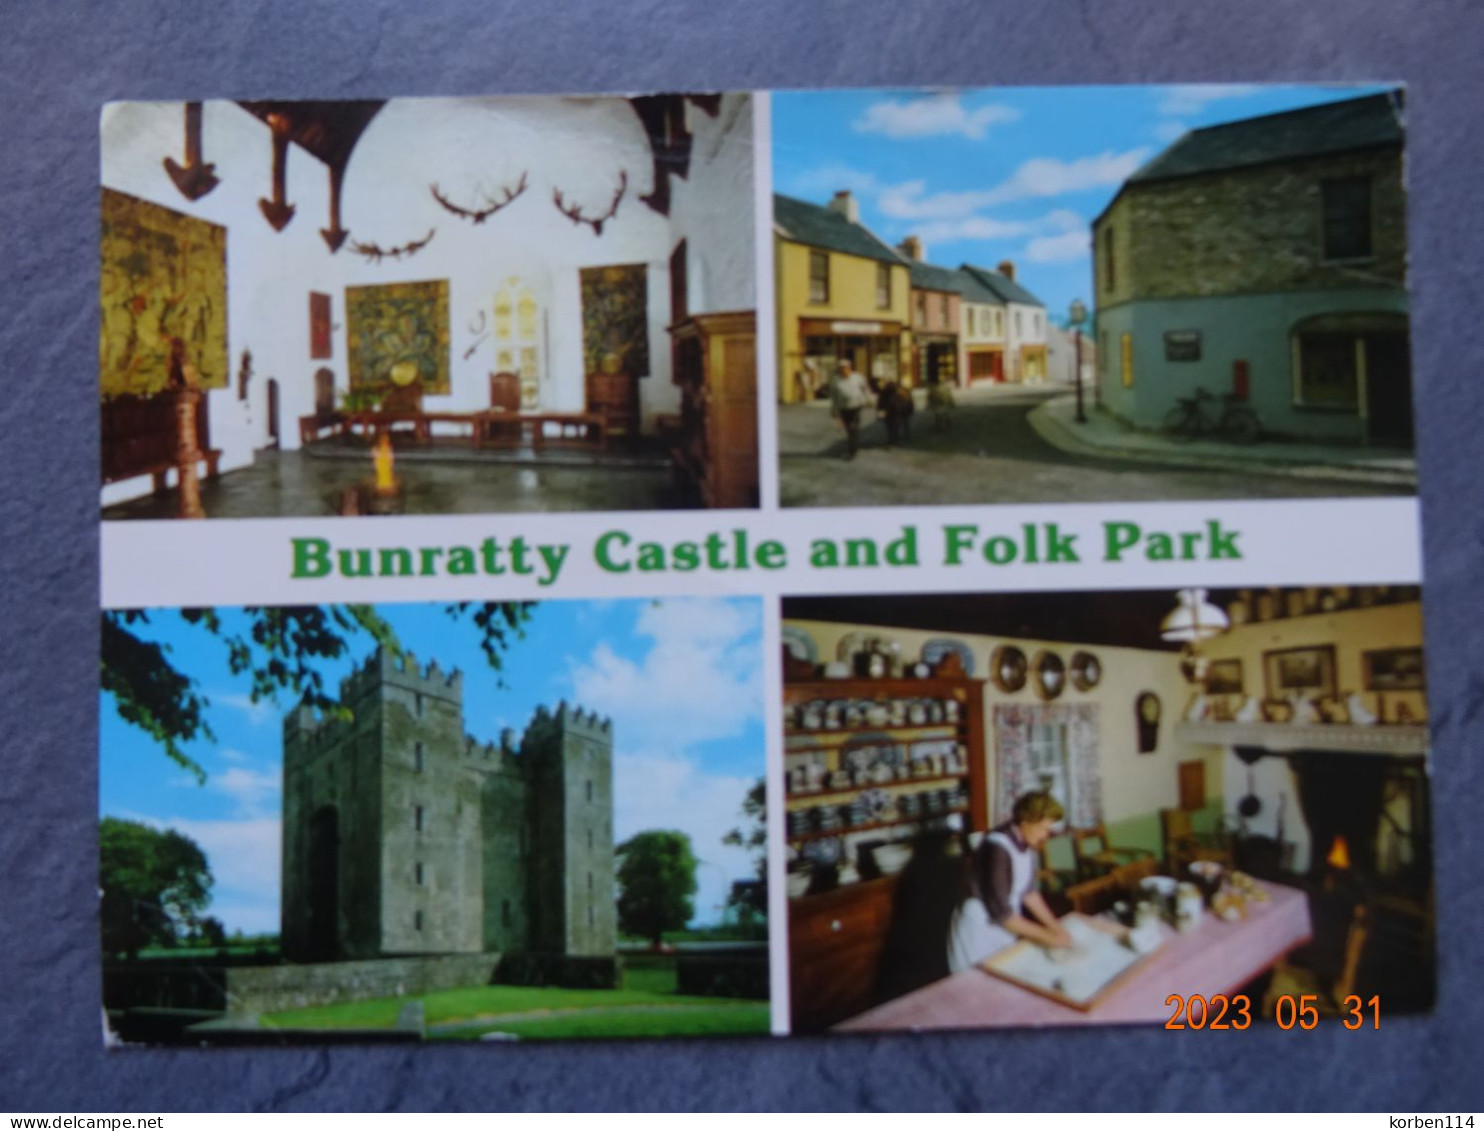 BUNRATTY CASTLE AND FOLK PARK - Clare